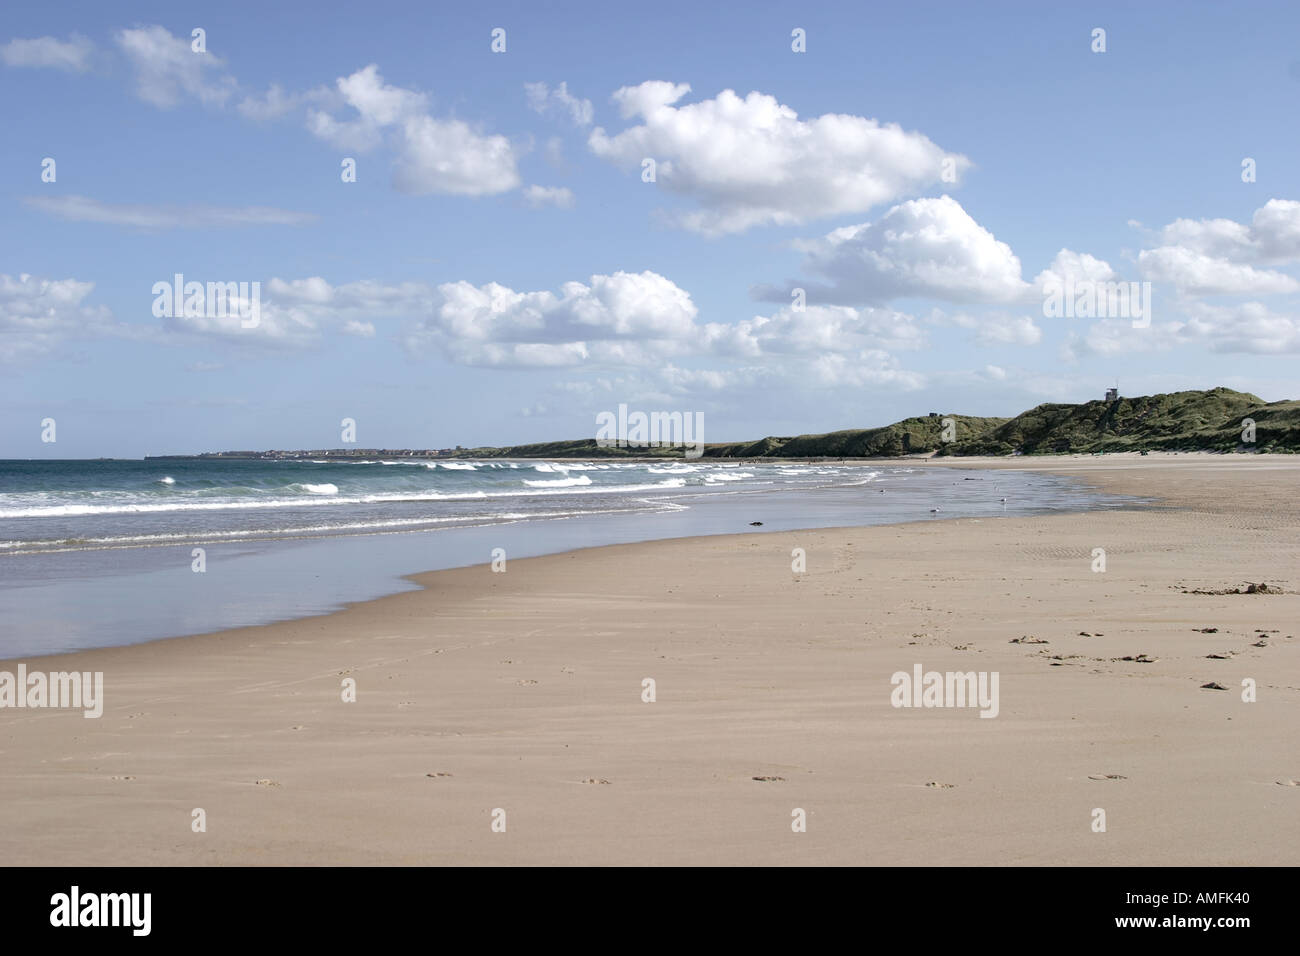 landscape shot showing large expanse of sandy beach with tide coming in Blue sky with white clouds and sand dunes Stock Photo